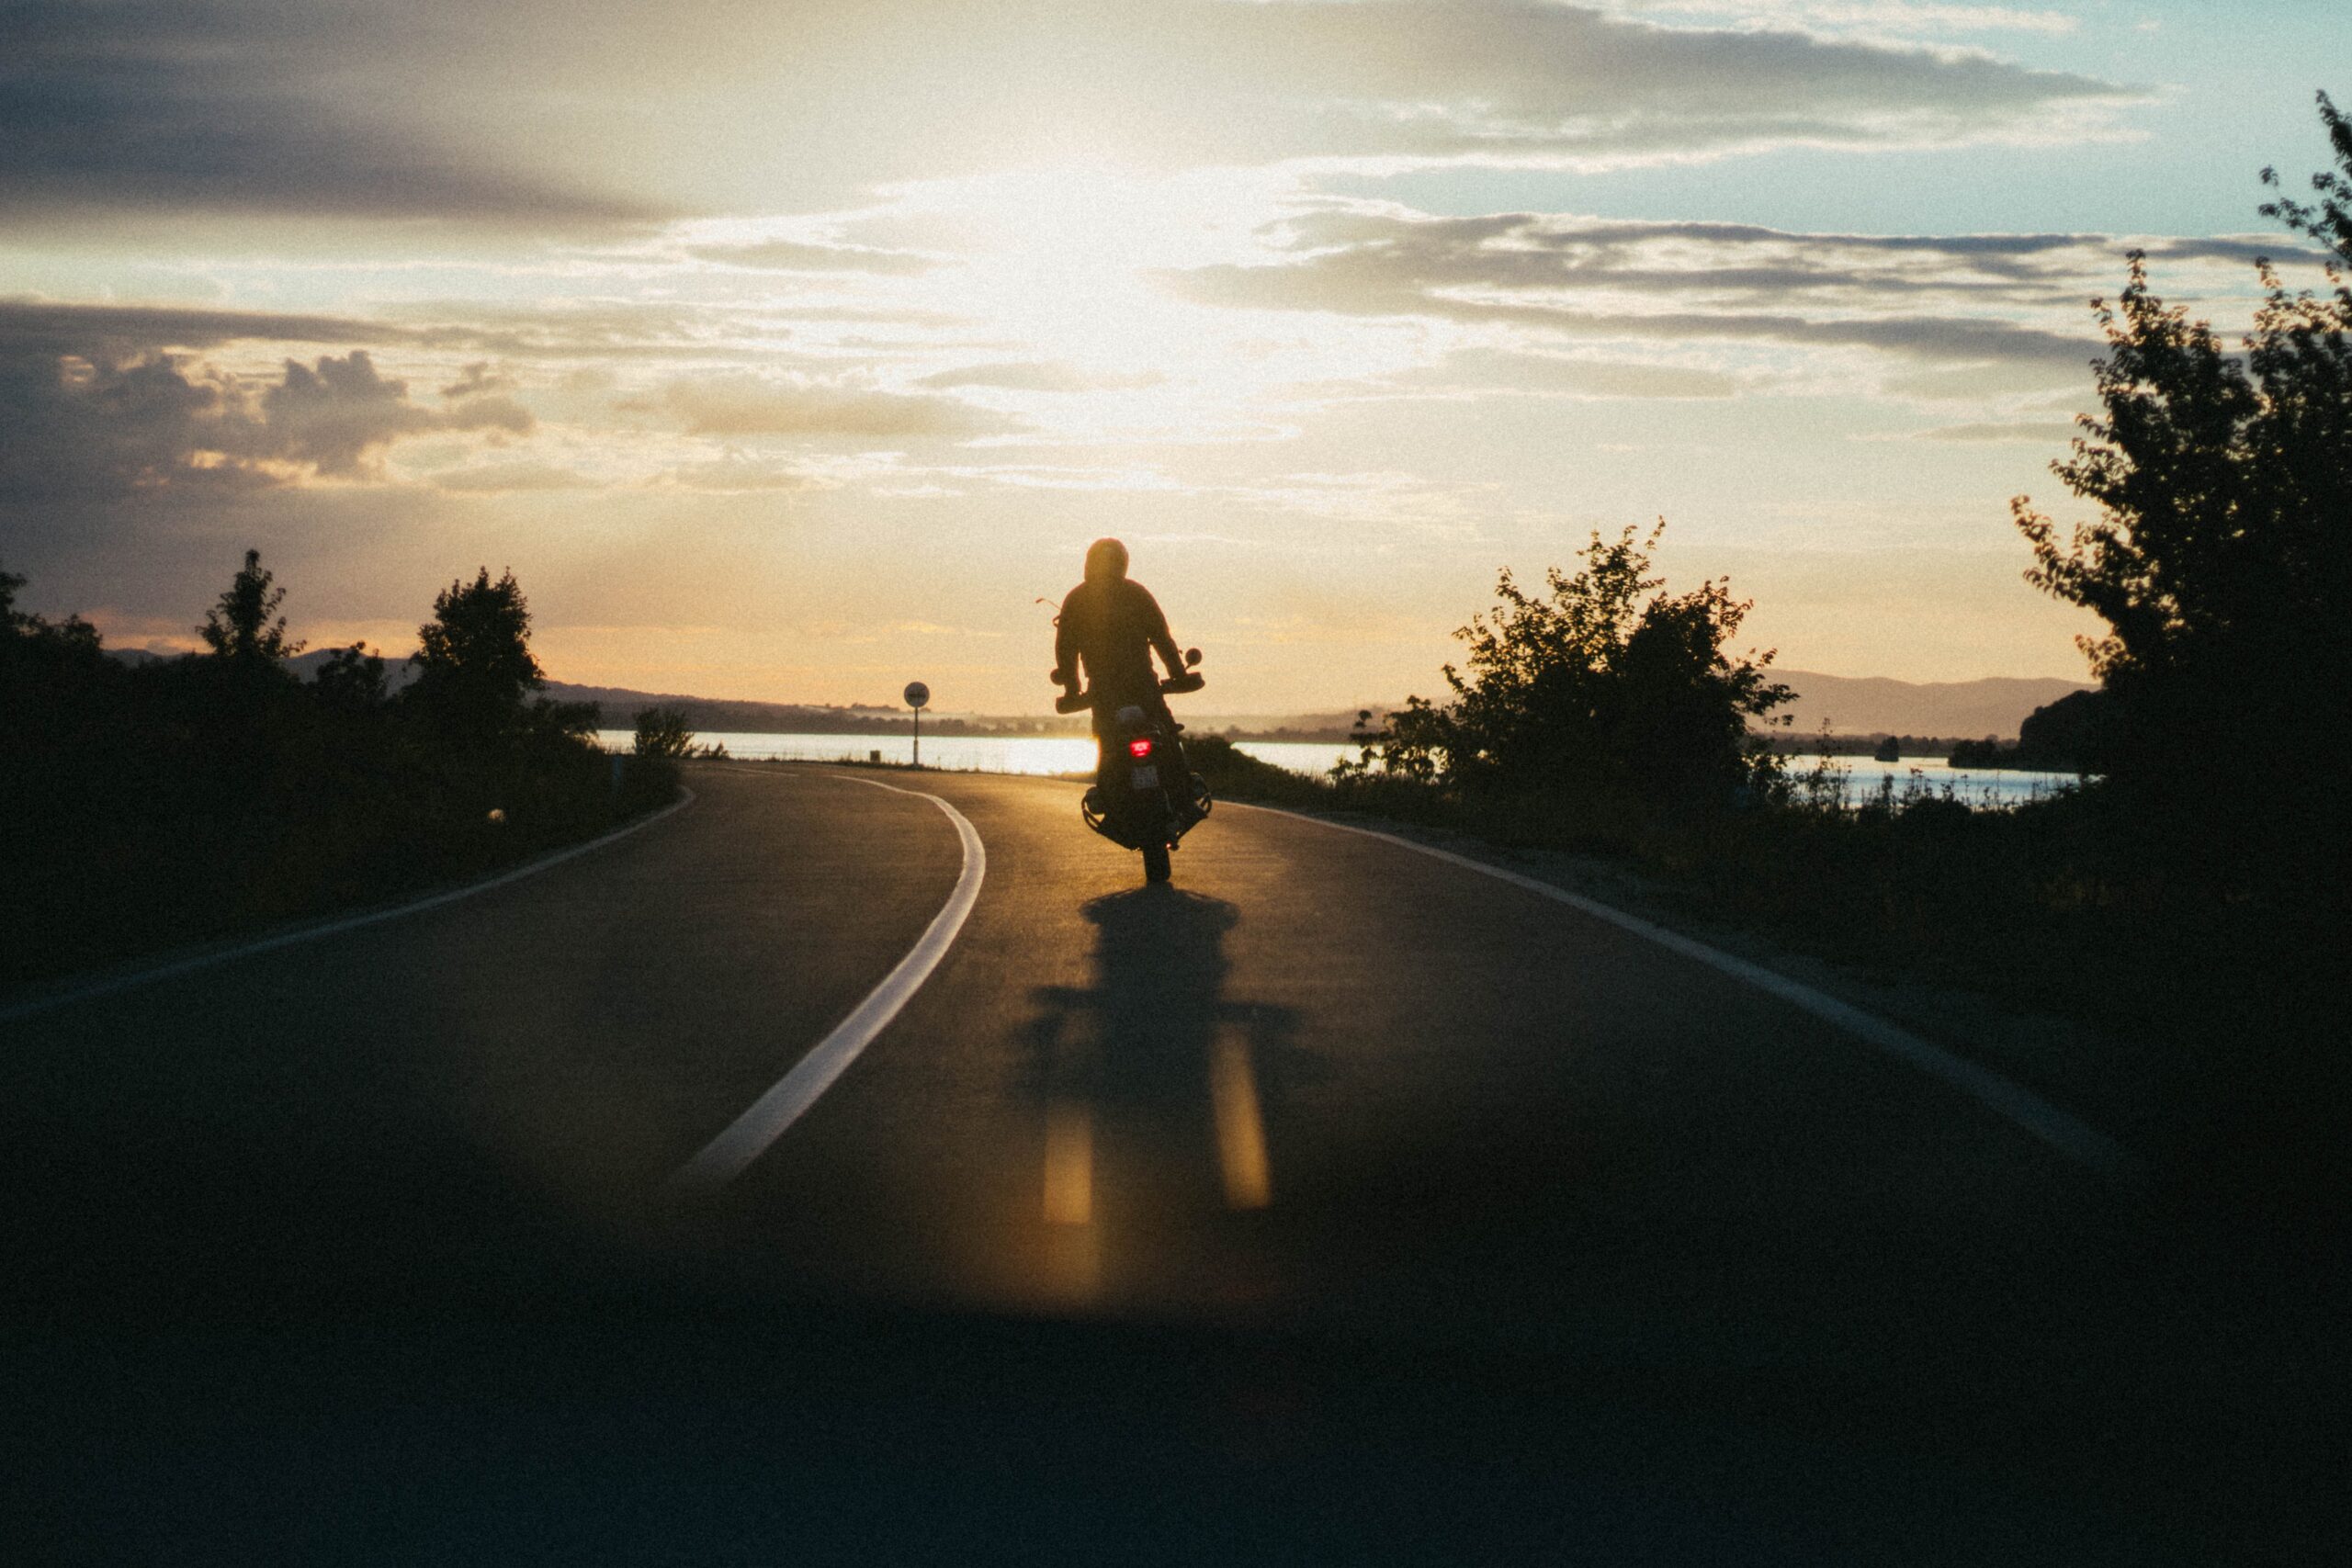 Motorcyclist riding on a sunny highway